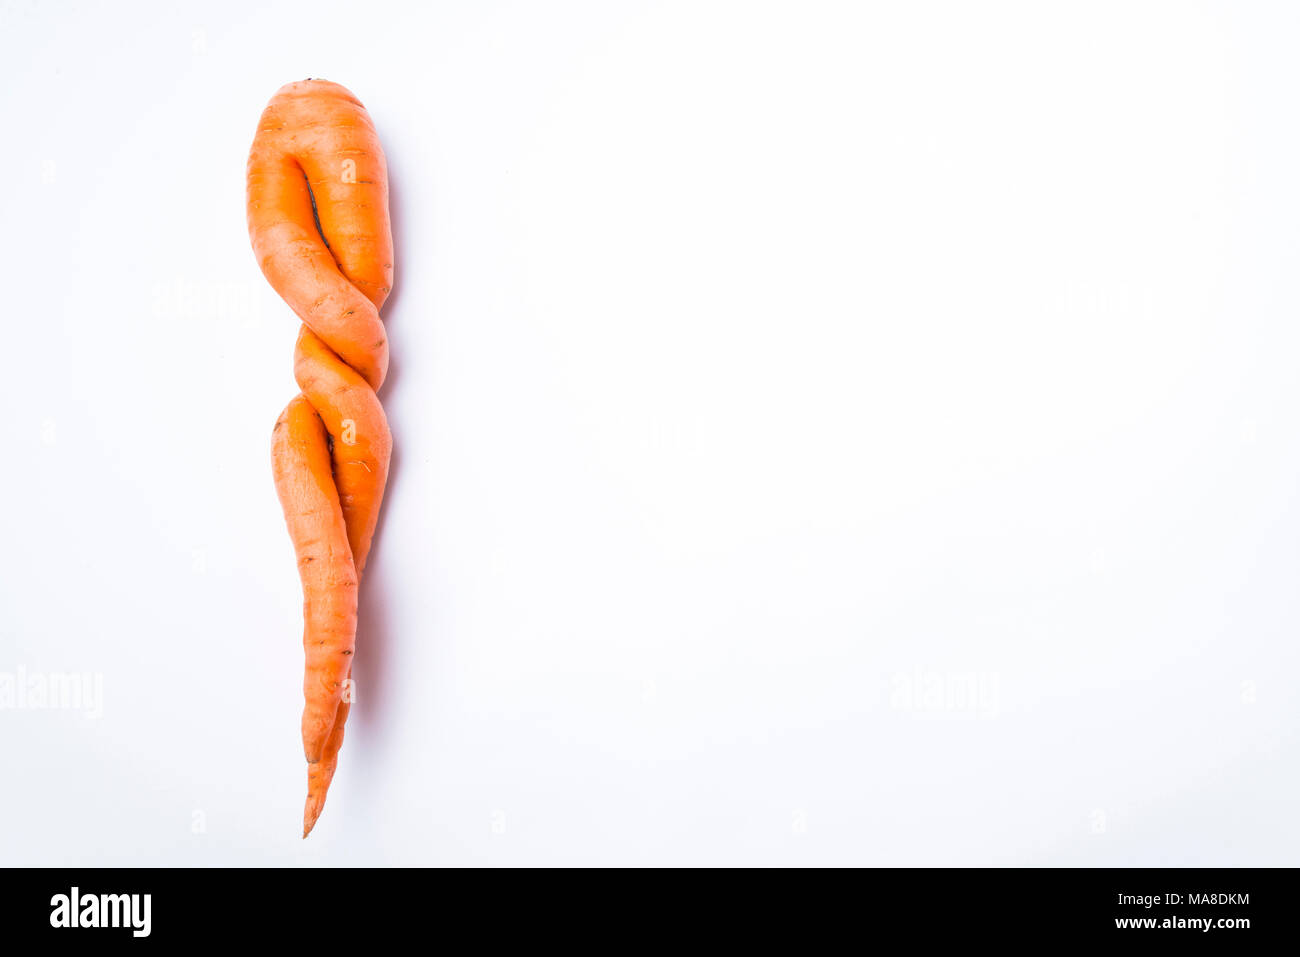 carrots of unusual shape lies on a white background Stock Photo